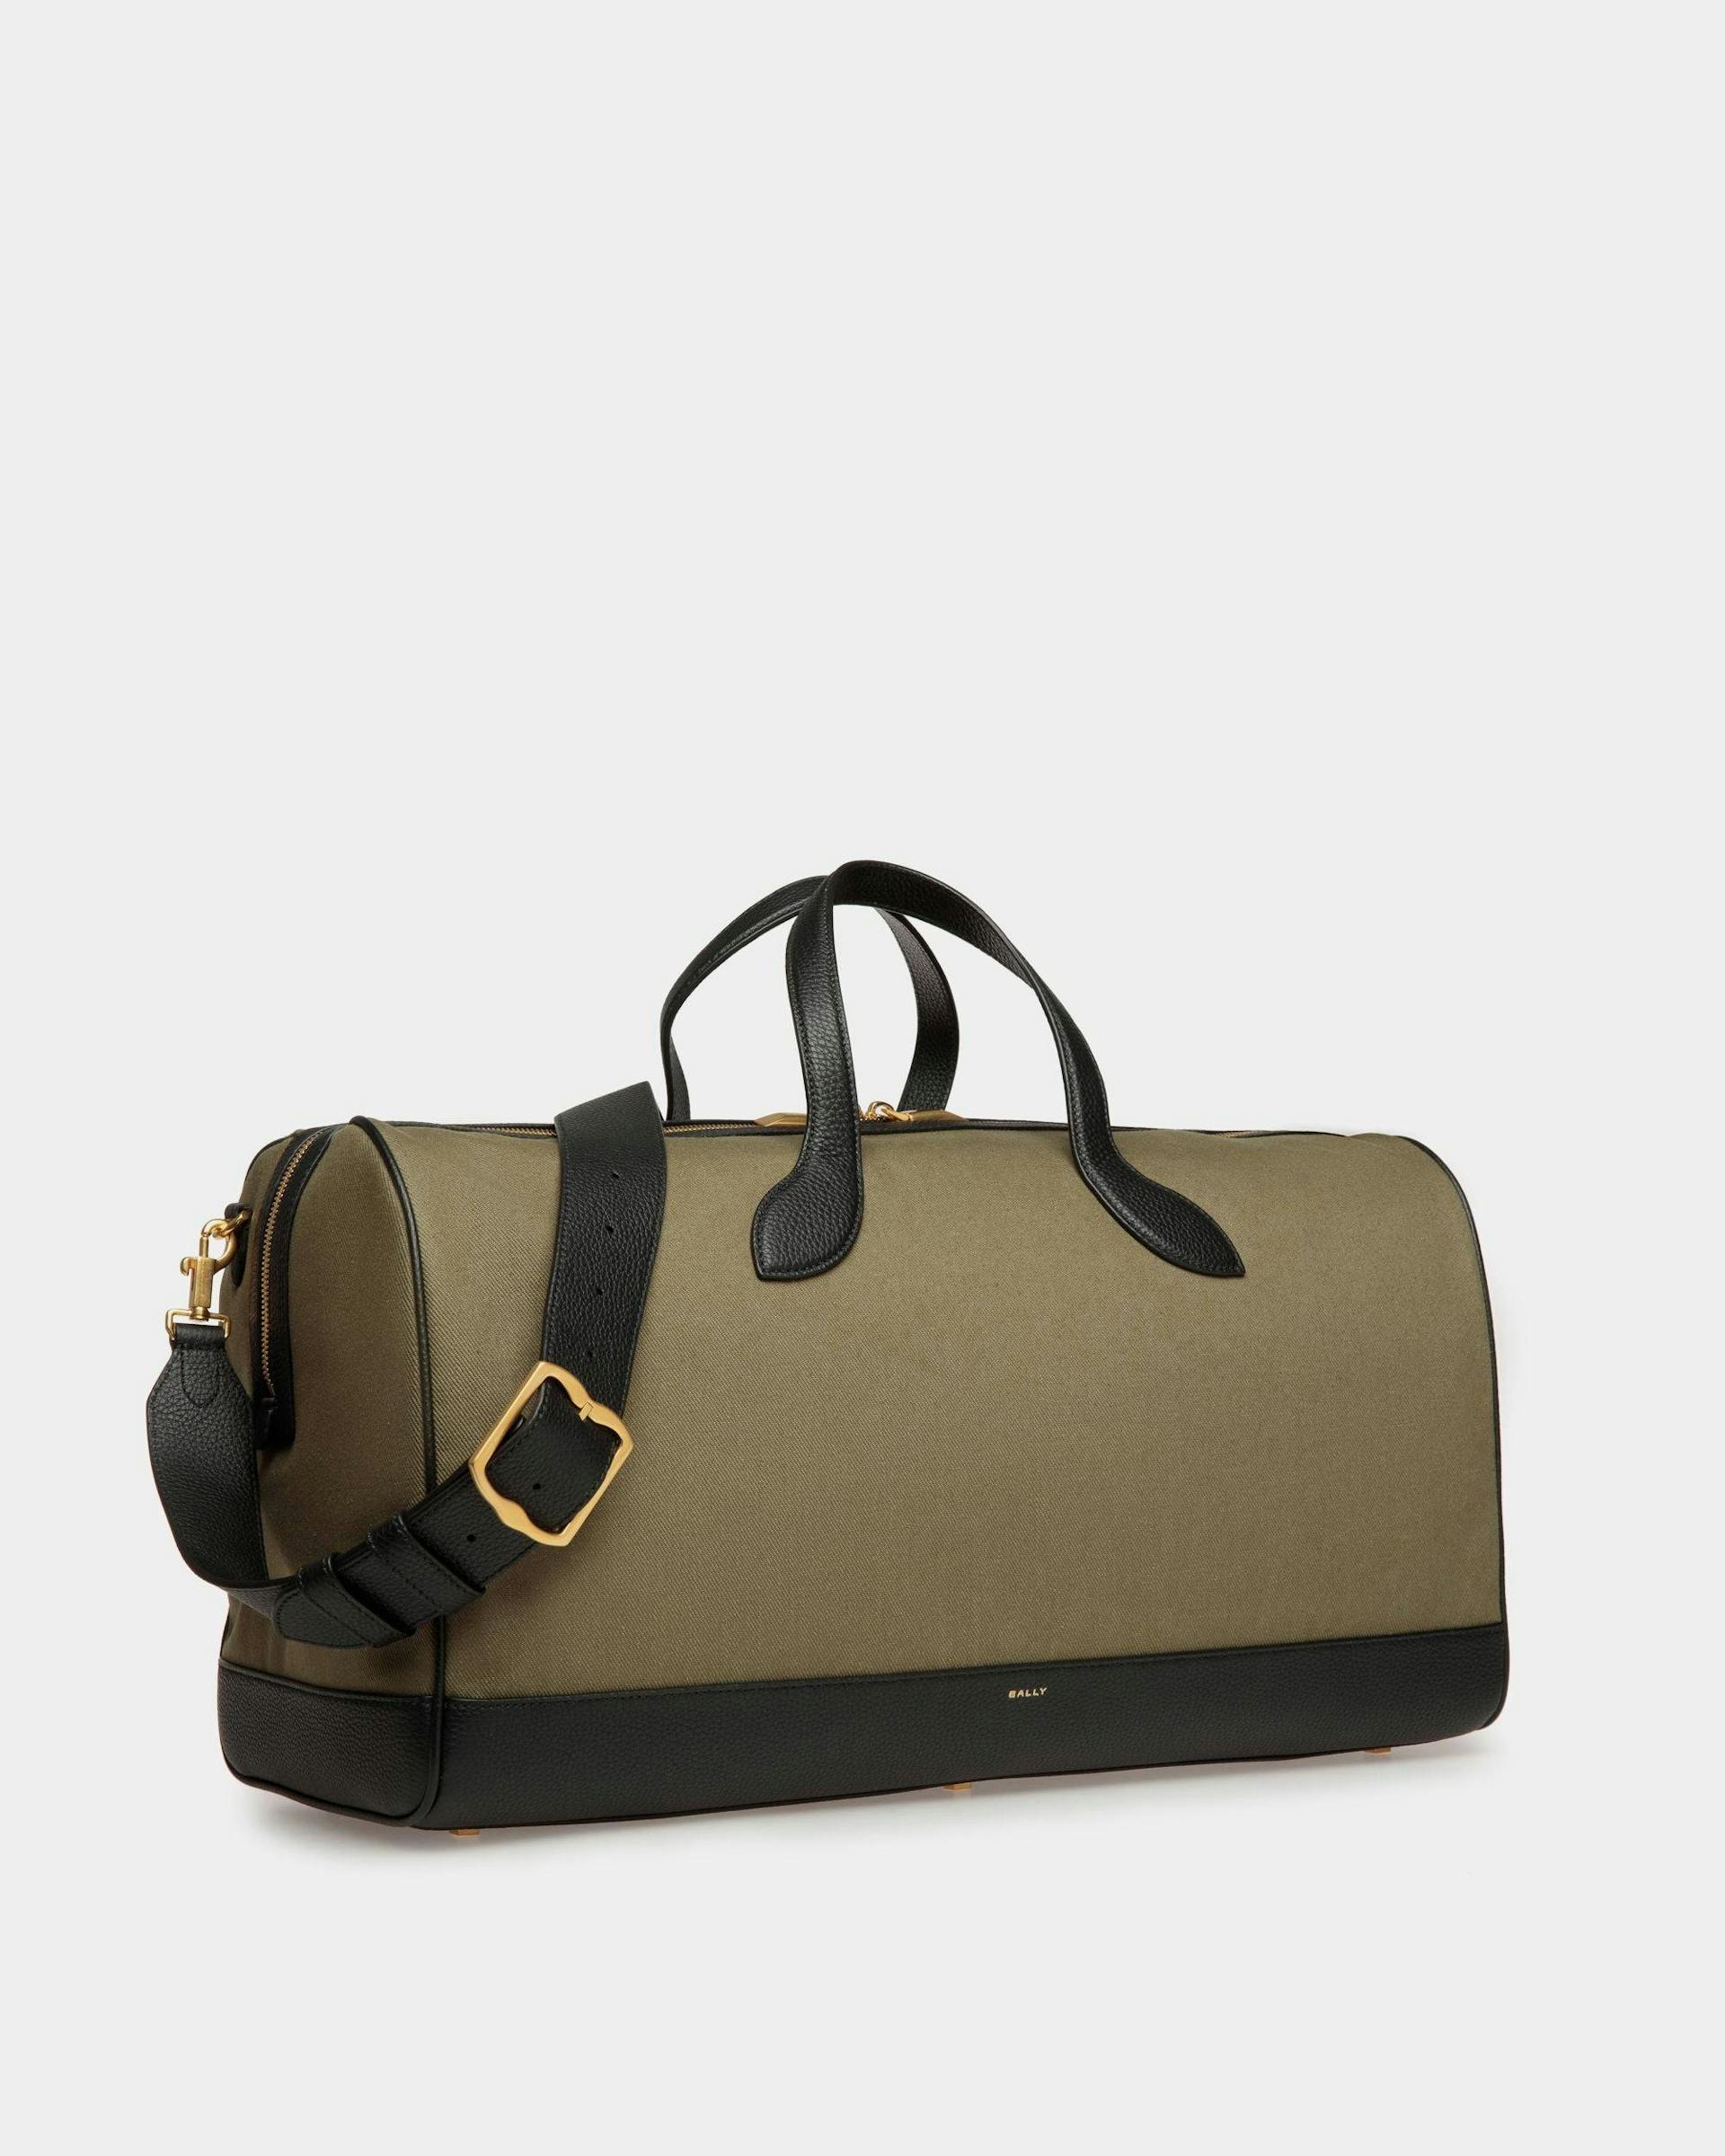 Men's Bar Weekender in Canvas And Leather | Bally | Still Life 3/4 Front